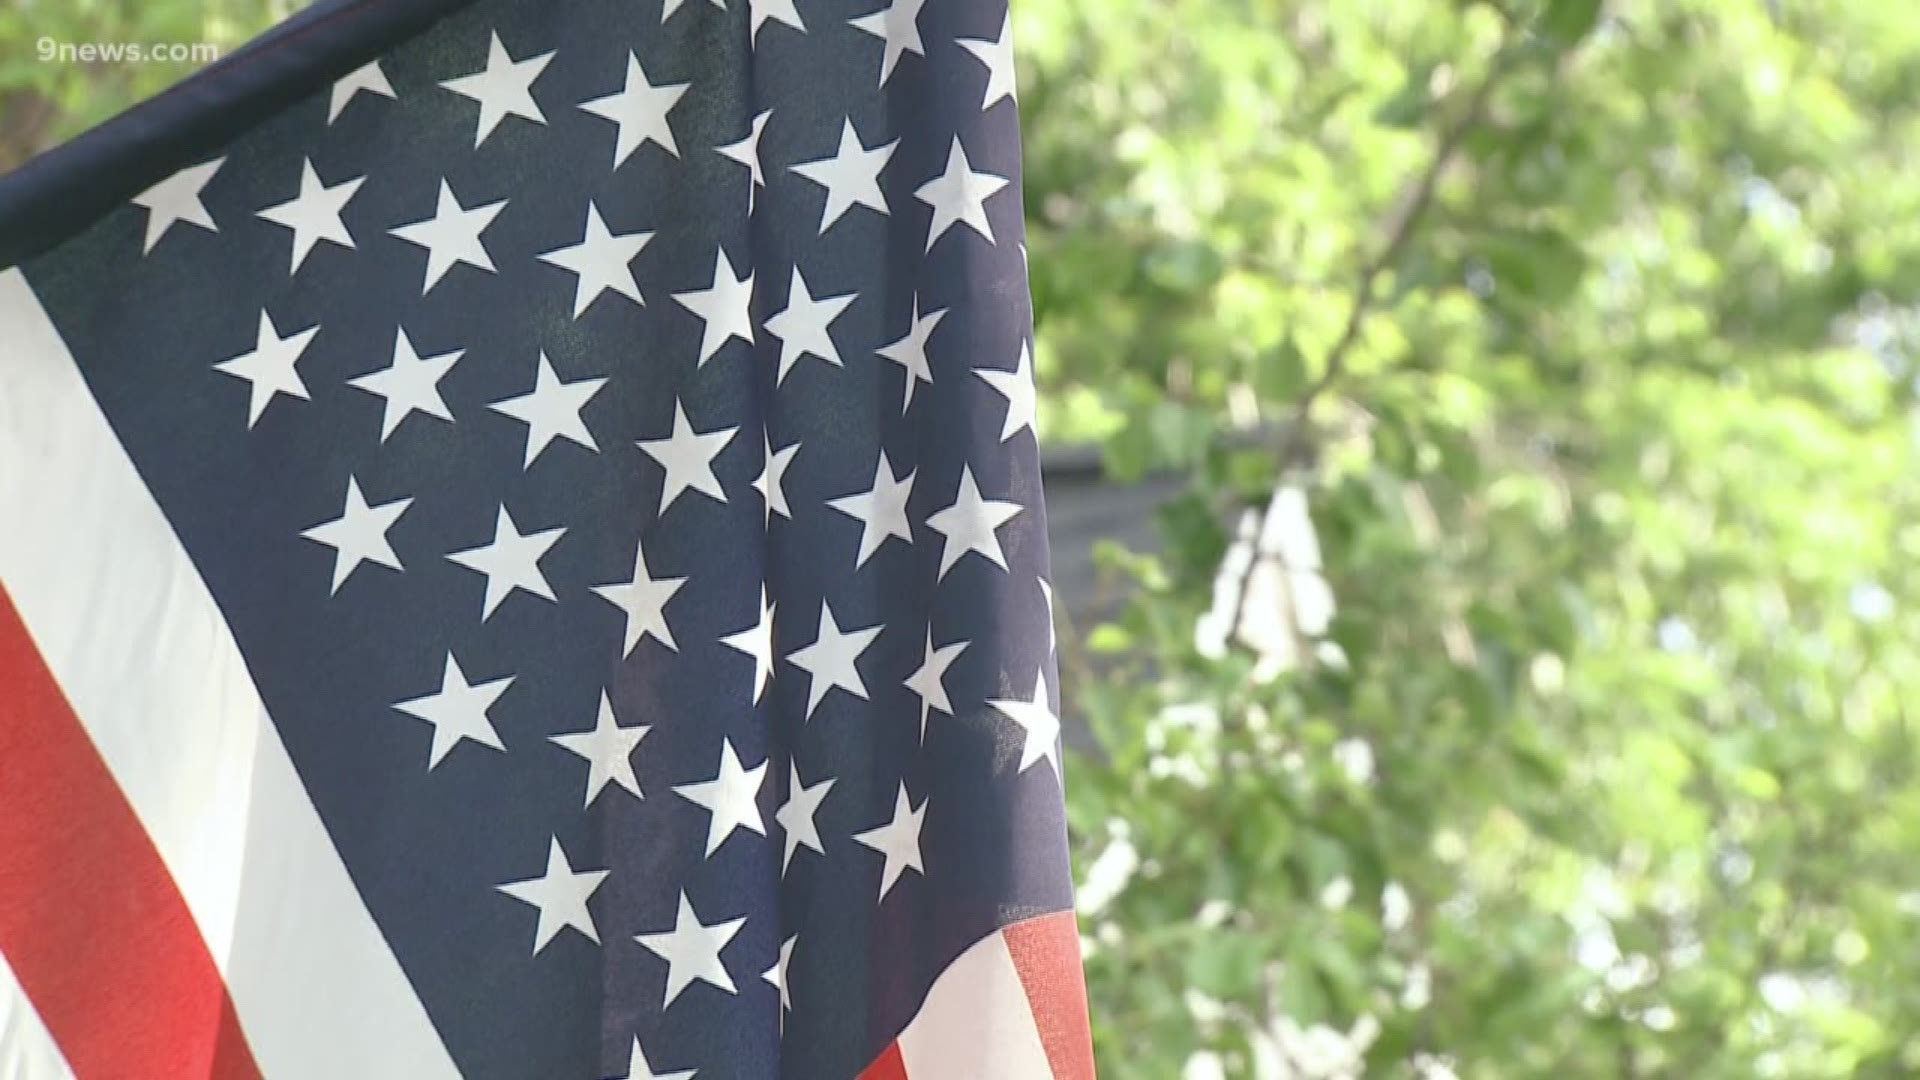 Thousands of people are expected to be in Park Hill celebrating the Fourth of July in one of the biggest parades in the city.